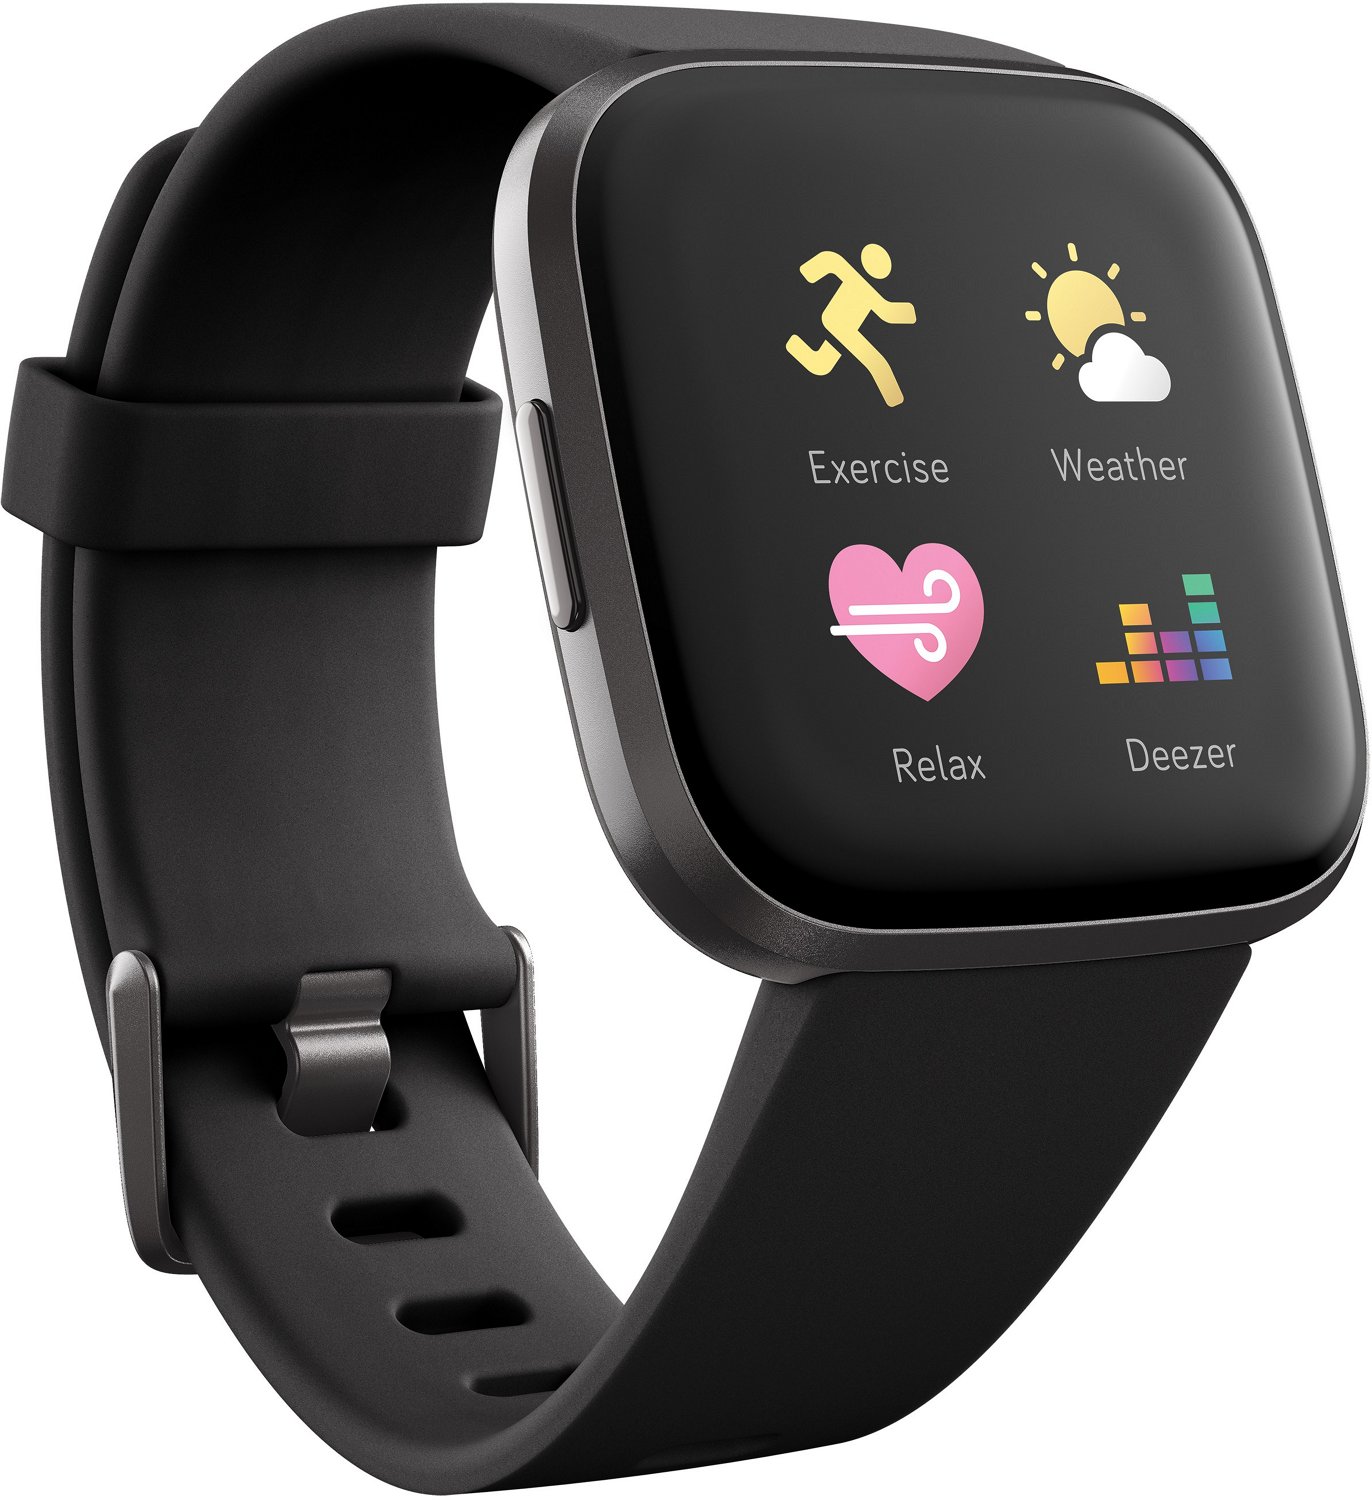 Fitbit - Up to 30% Off | Academy